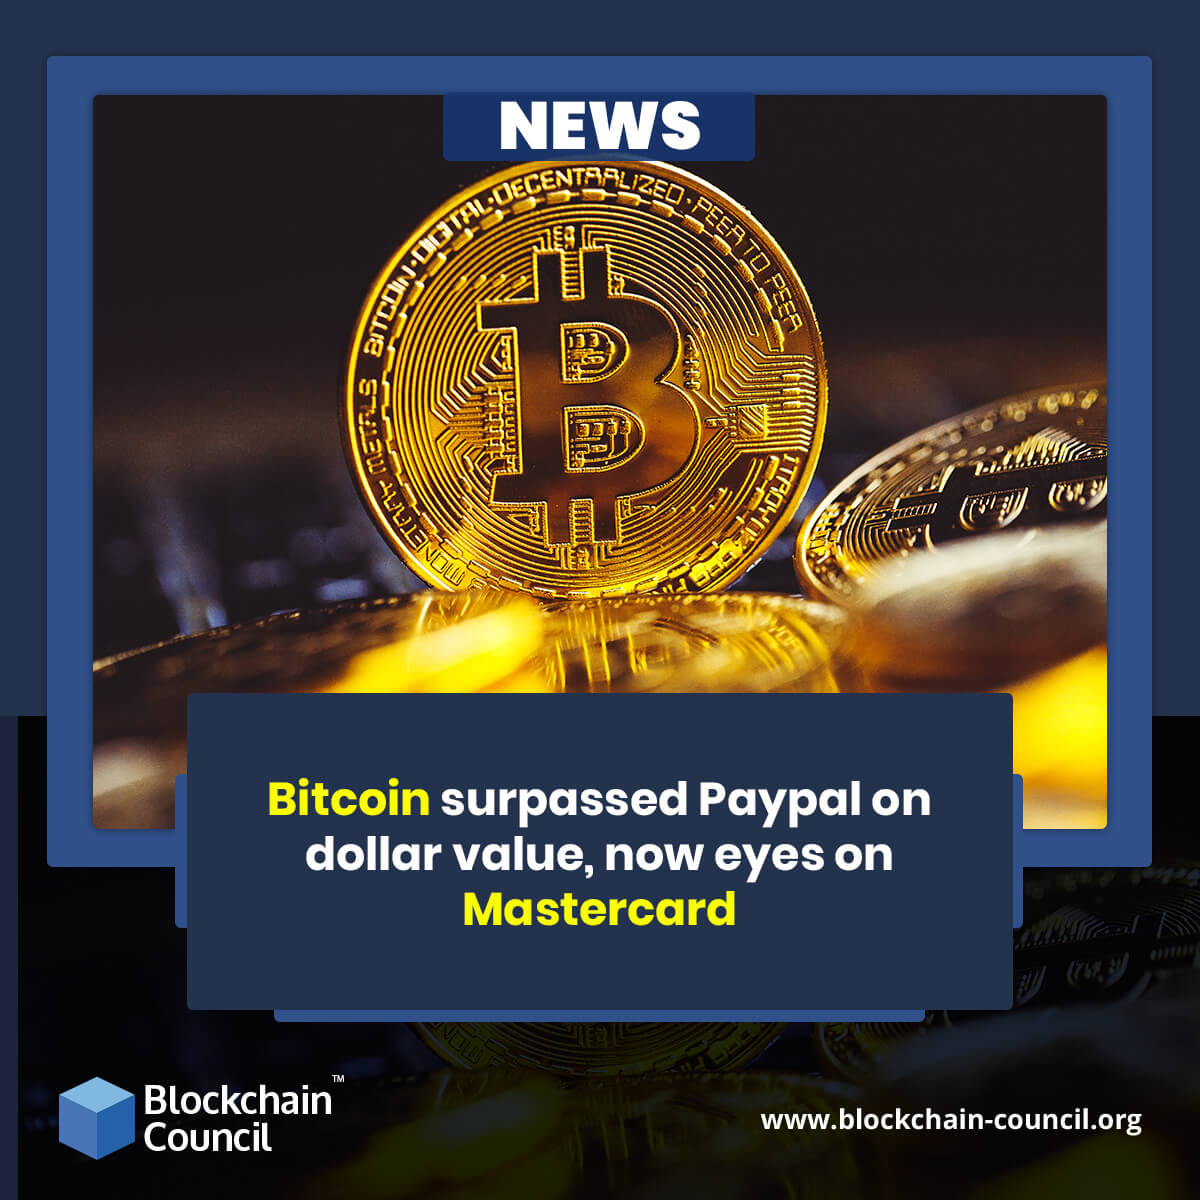 Bitcoin surpassed Paypal on dollar value, now eyes on Mastercard